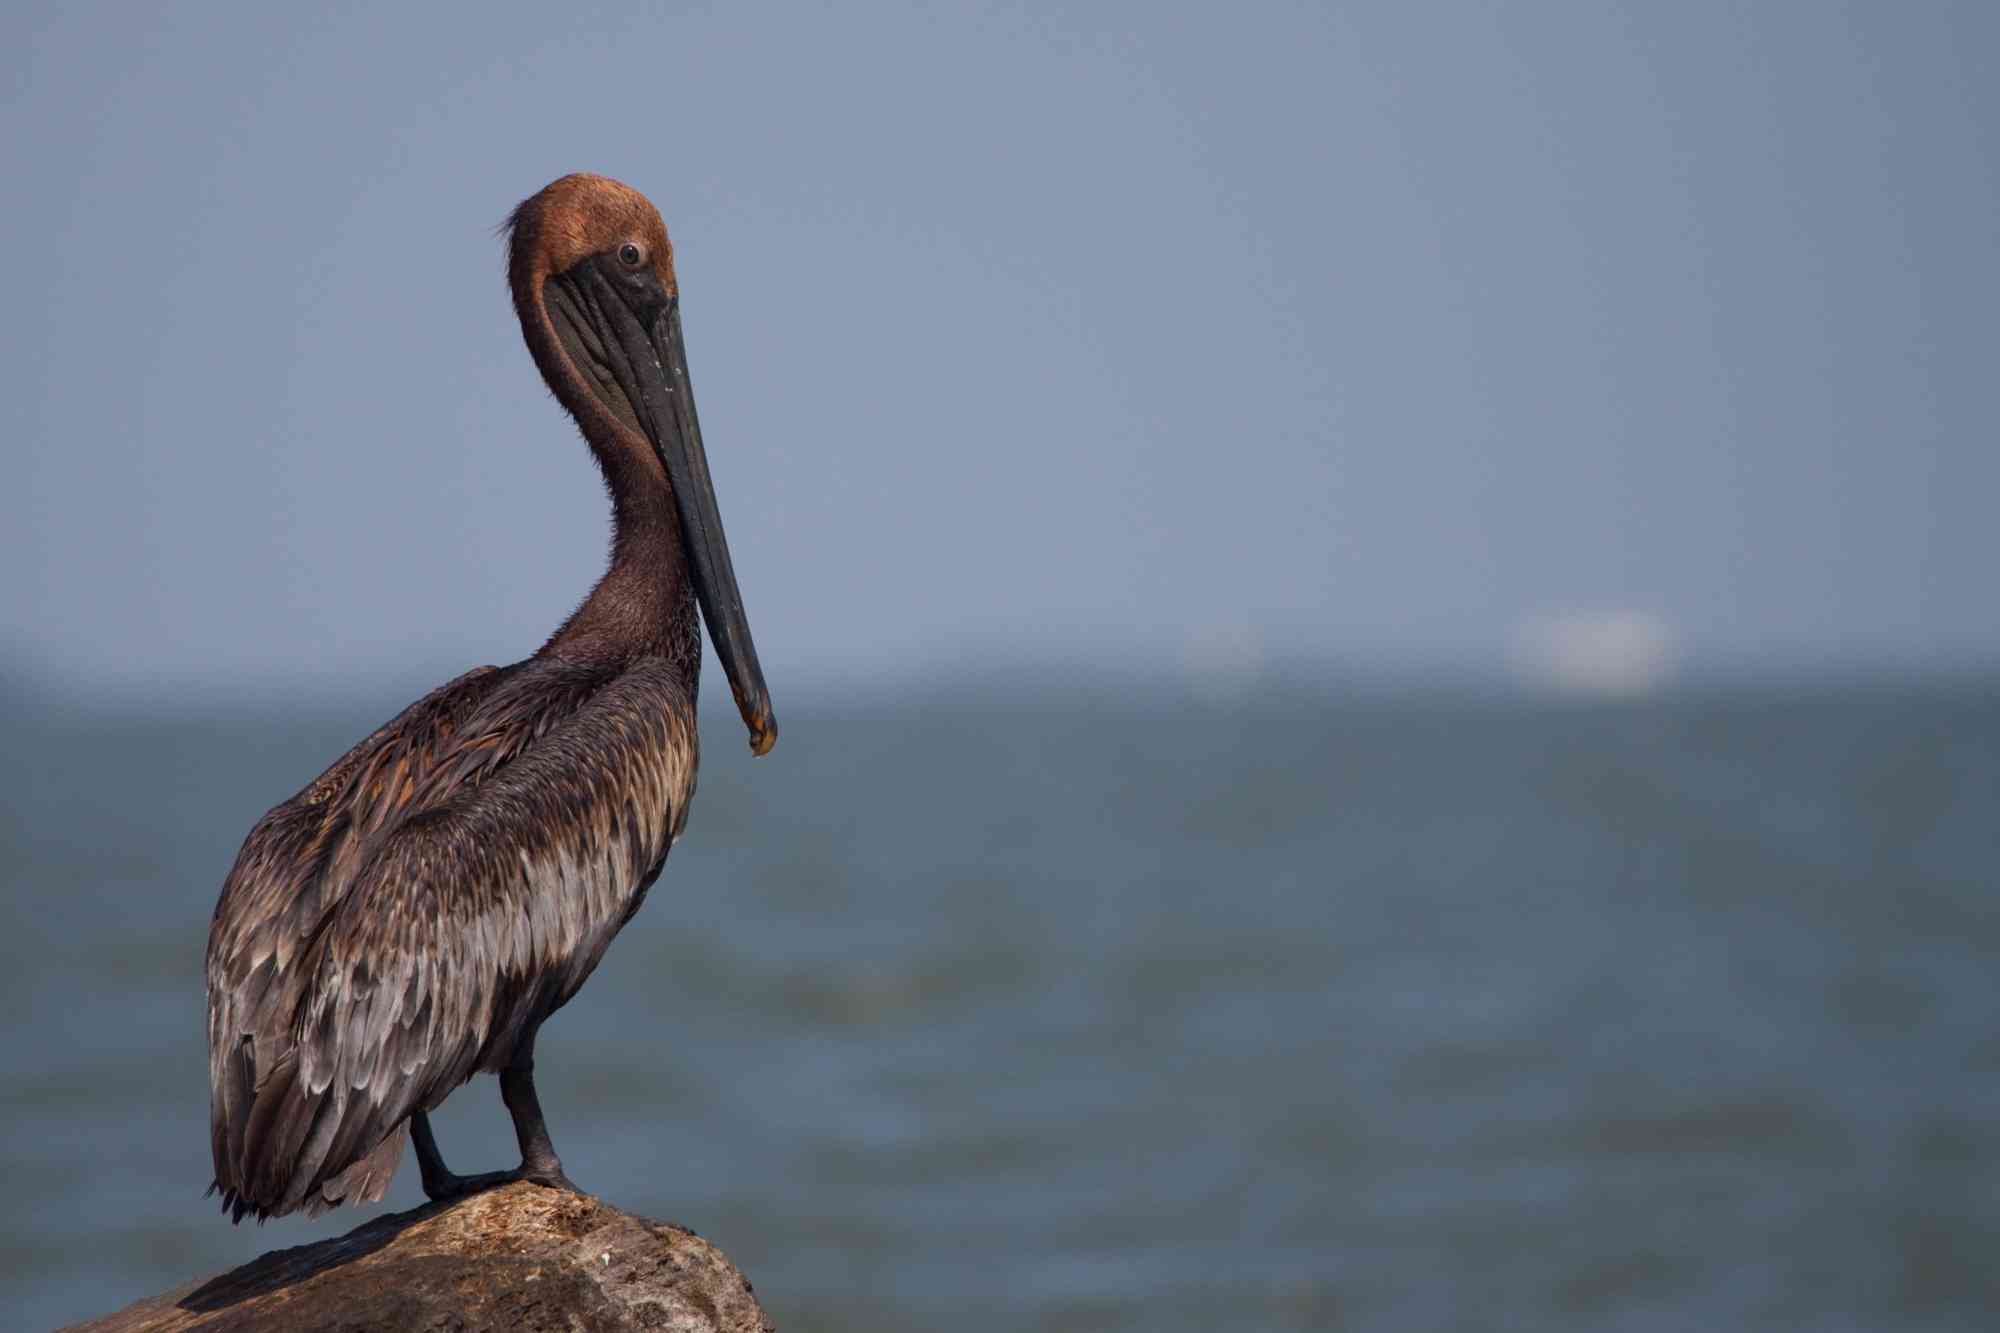 Oiled pelican in gulf after BP oil spill June 2010